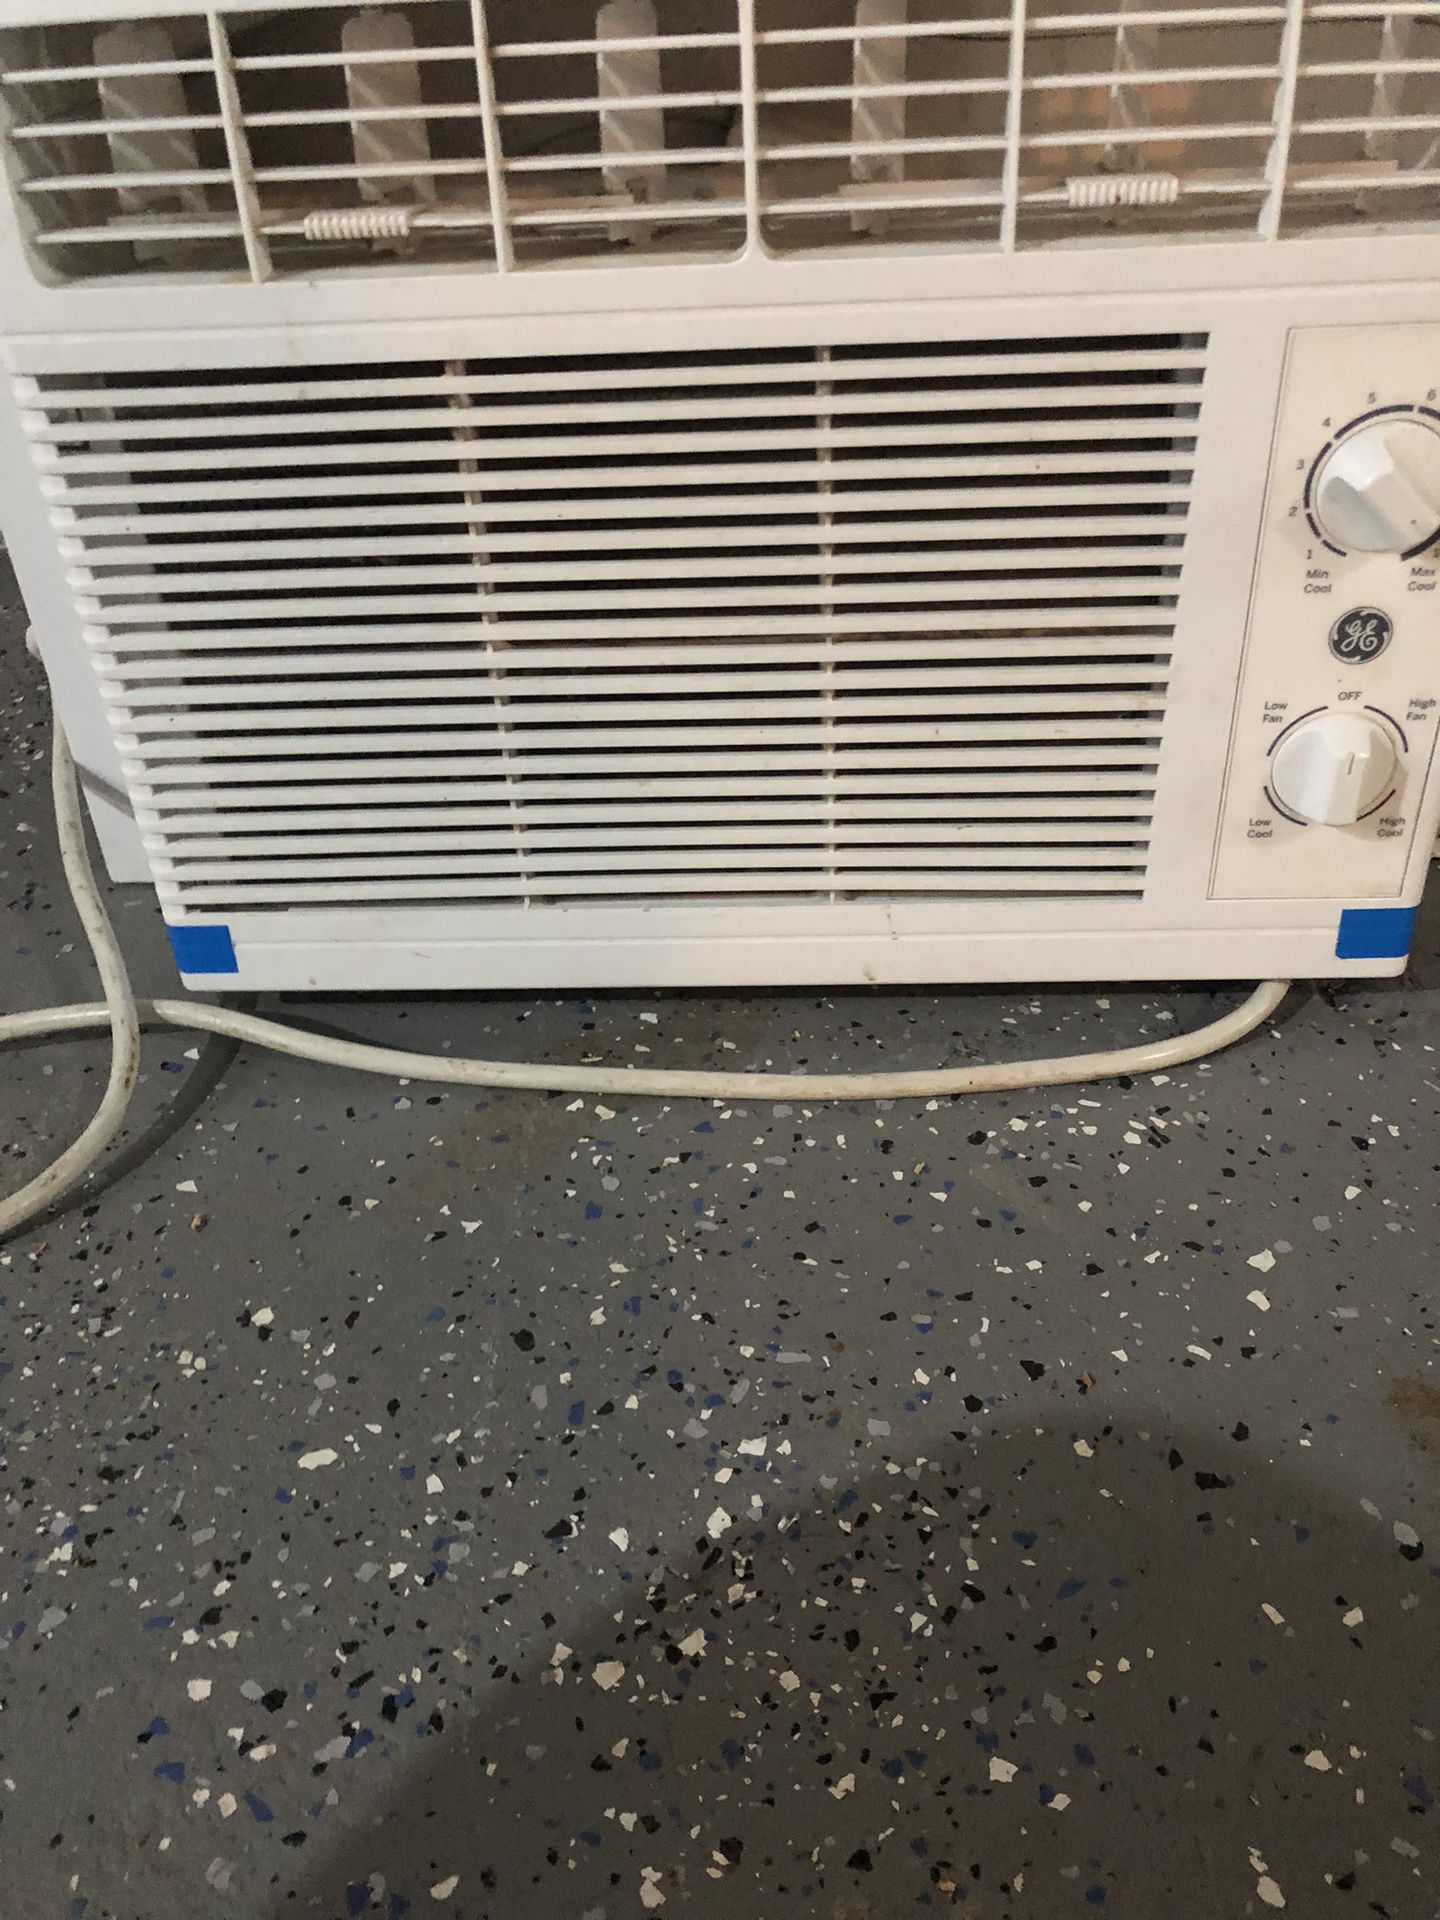 2 BedRoom Air Conditioners